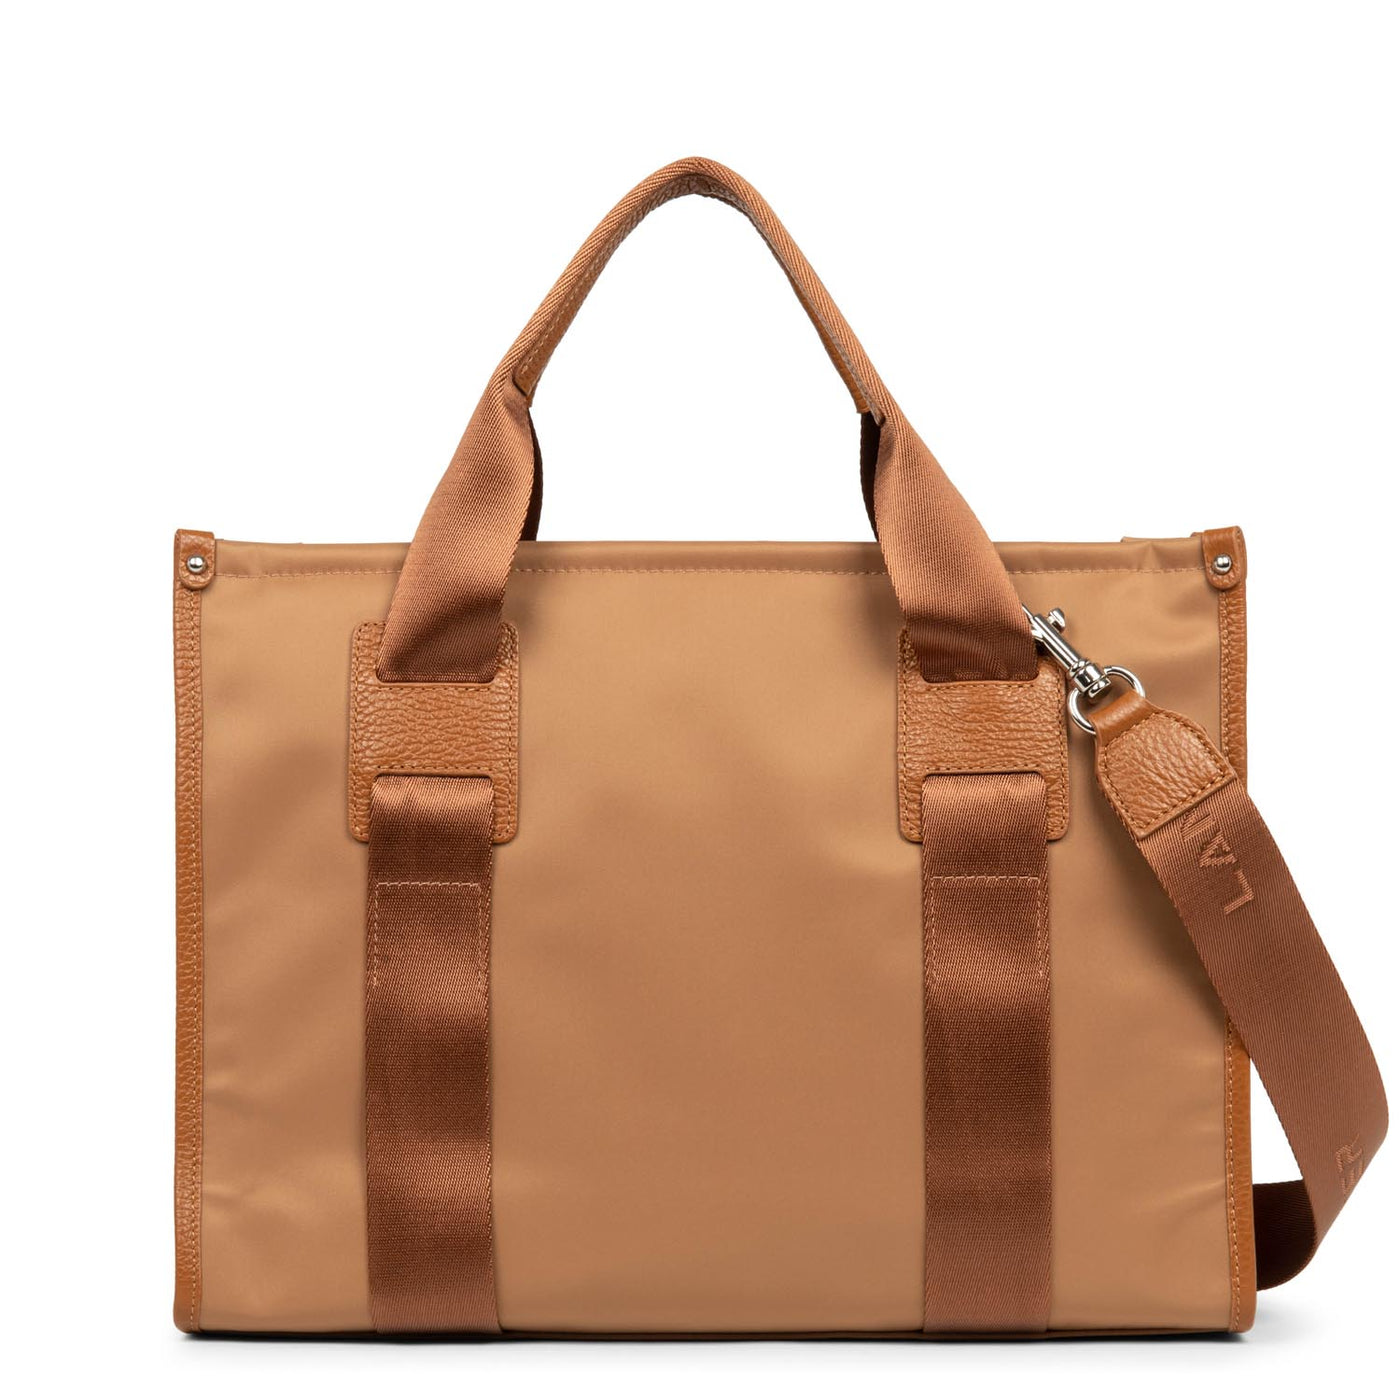 m tote bag - basic faculty #couleur_camel